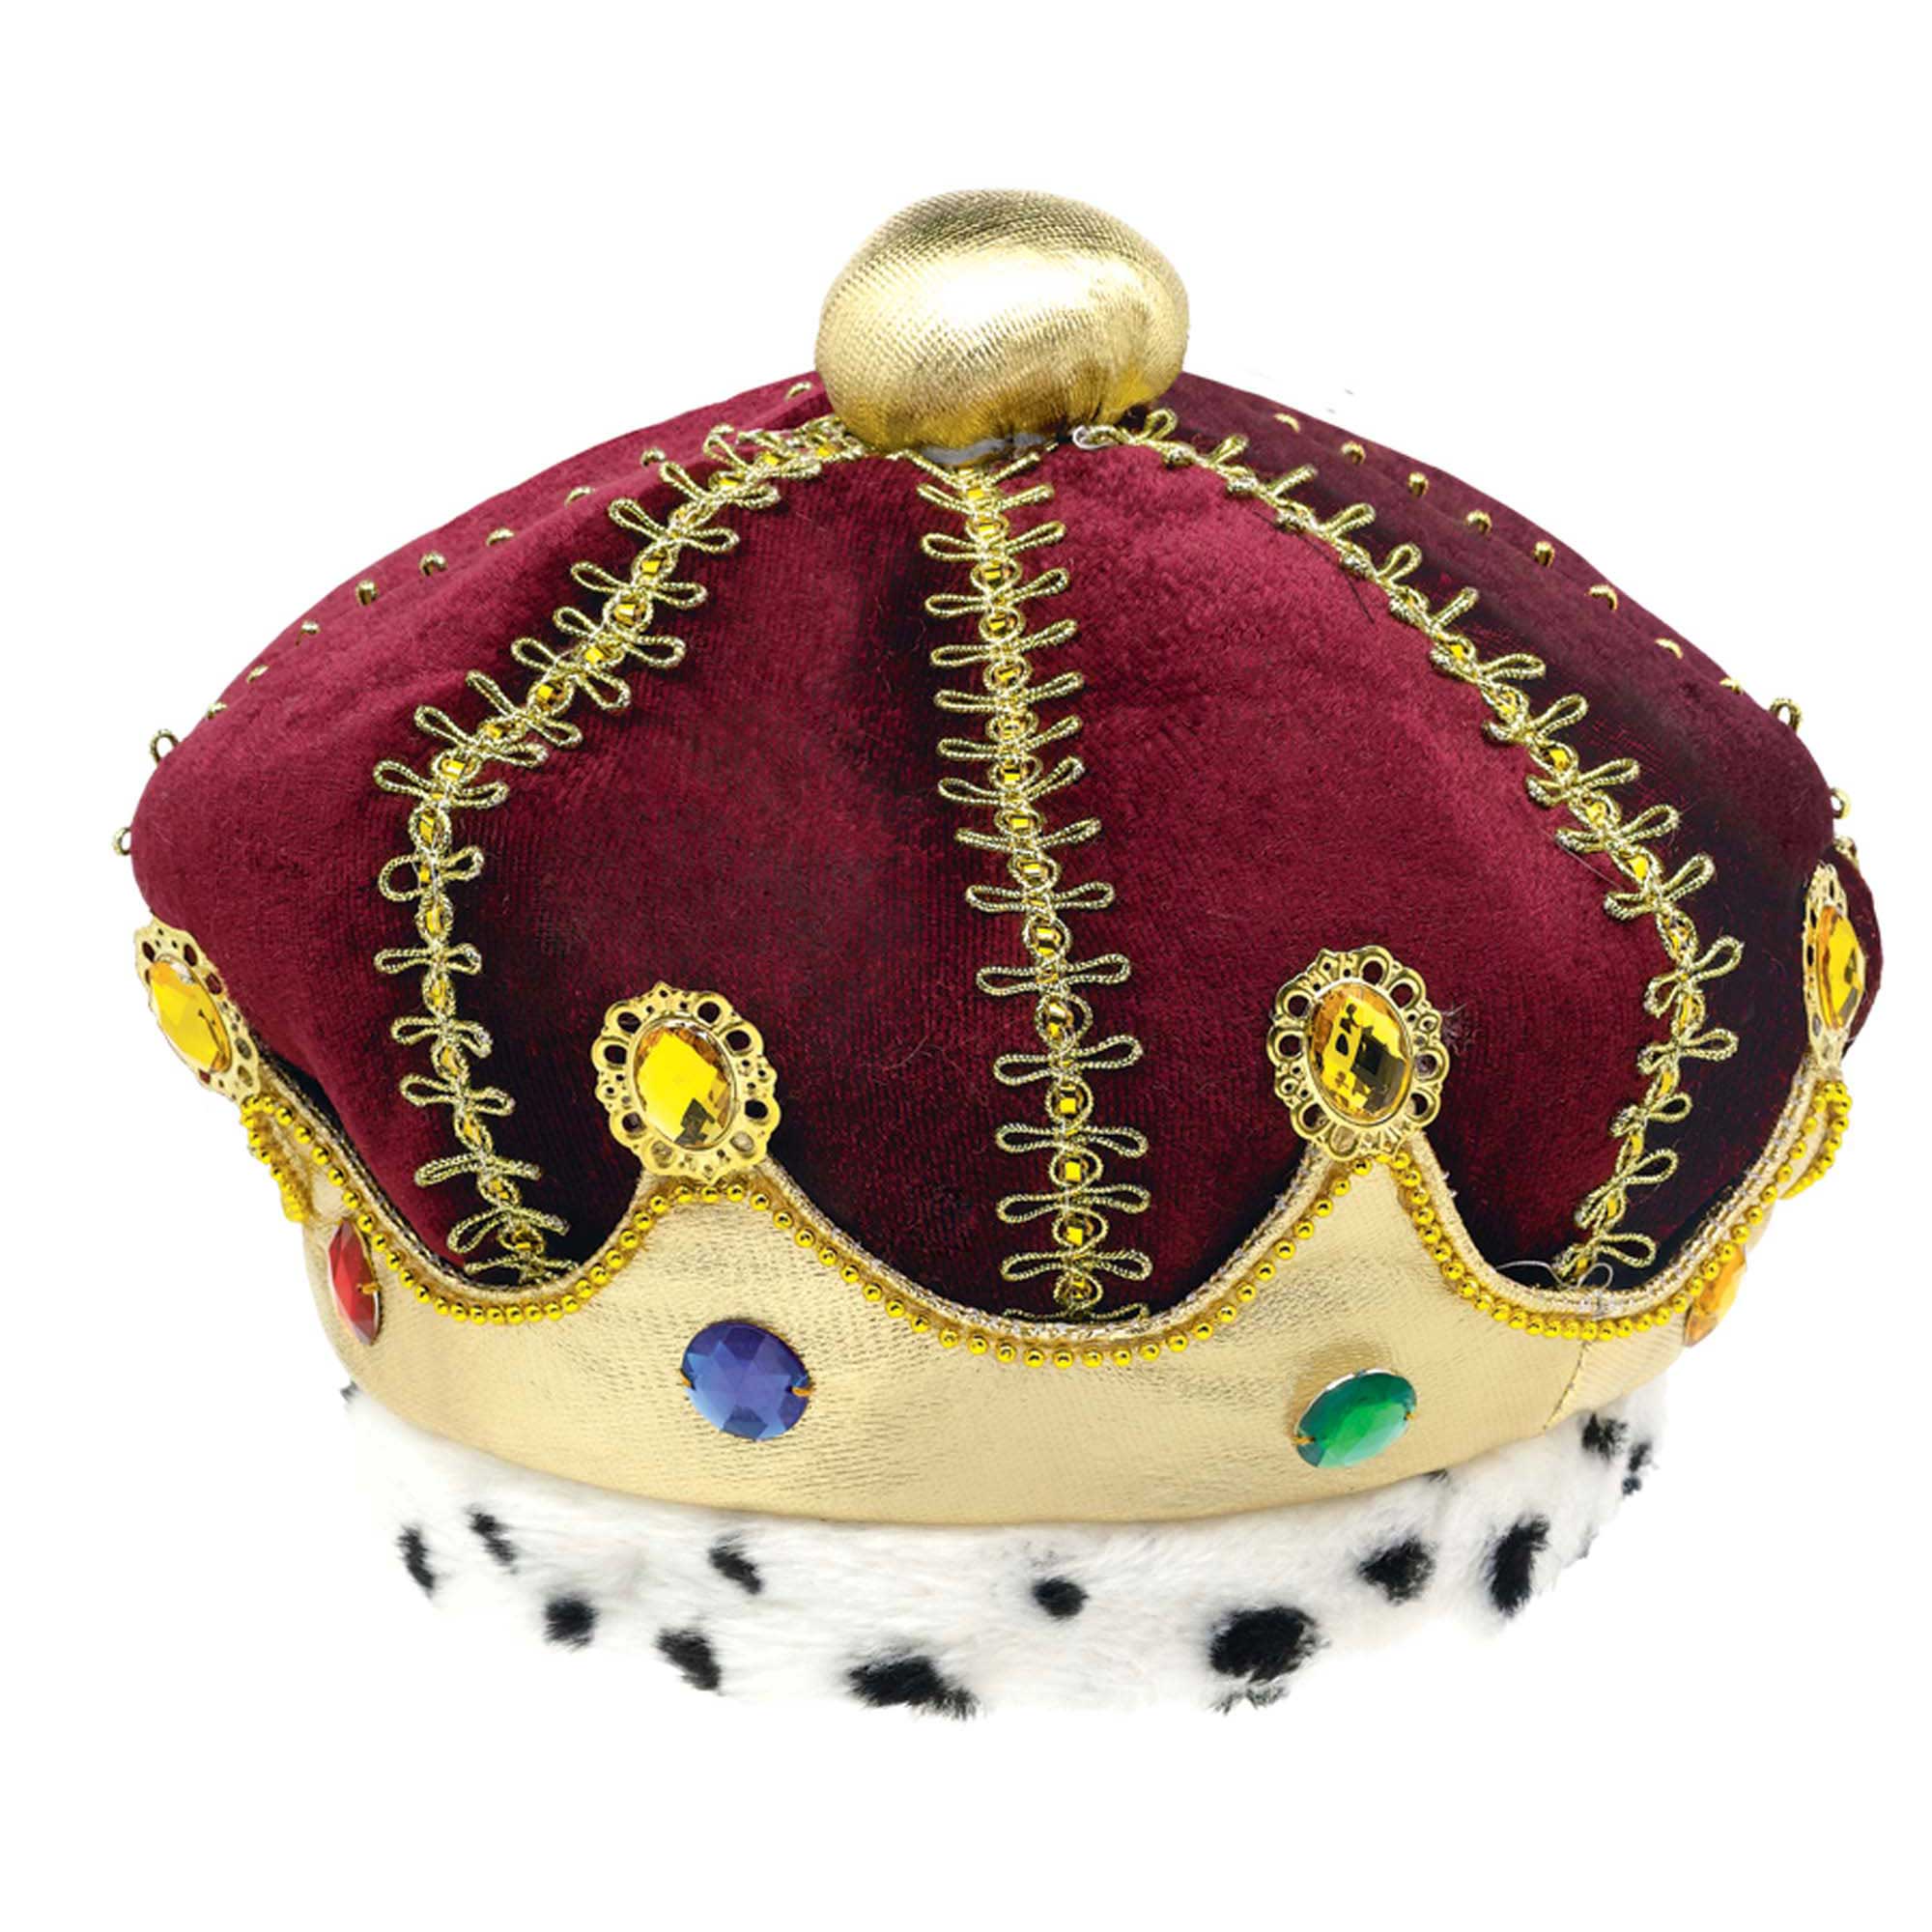 Prince Crown 7 x 7in - Party Centre